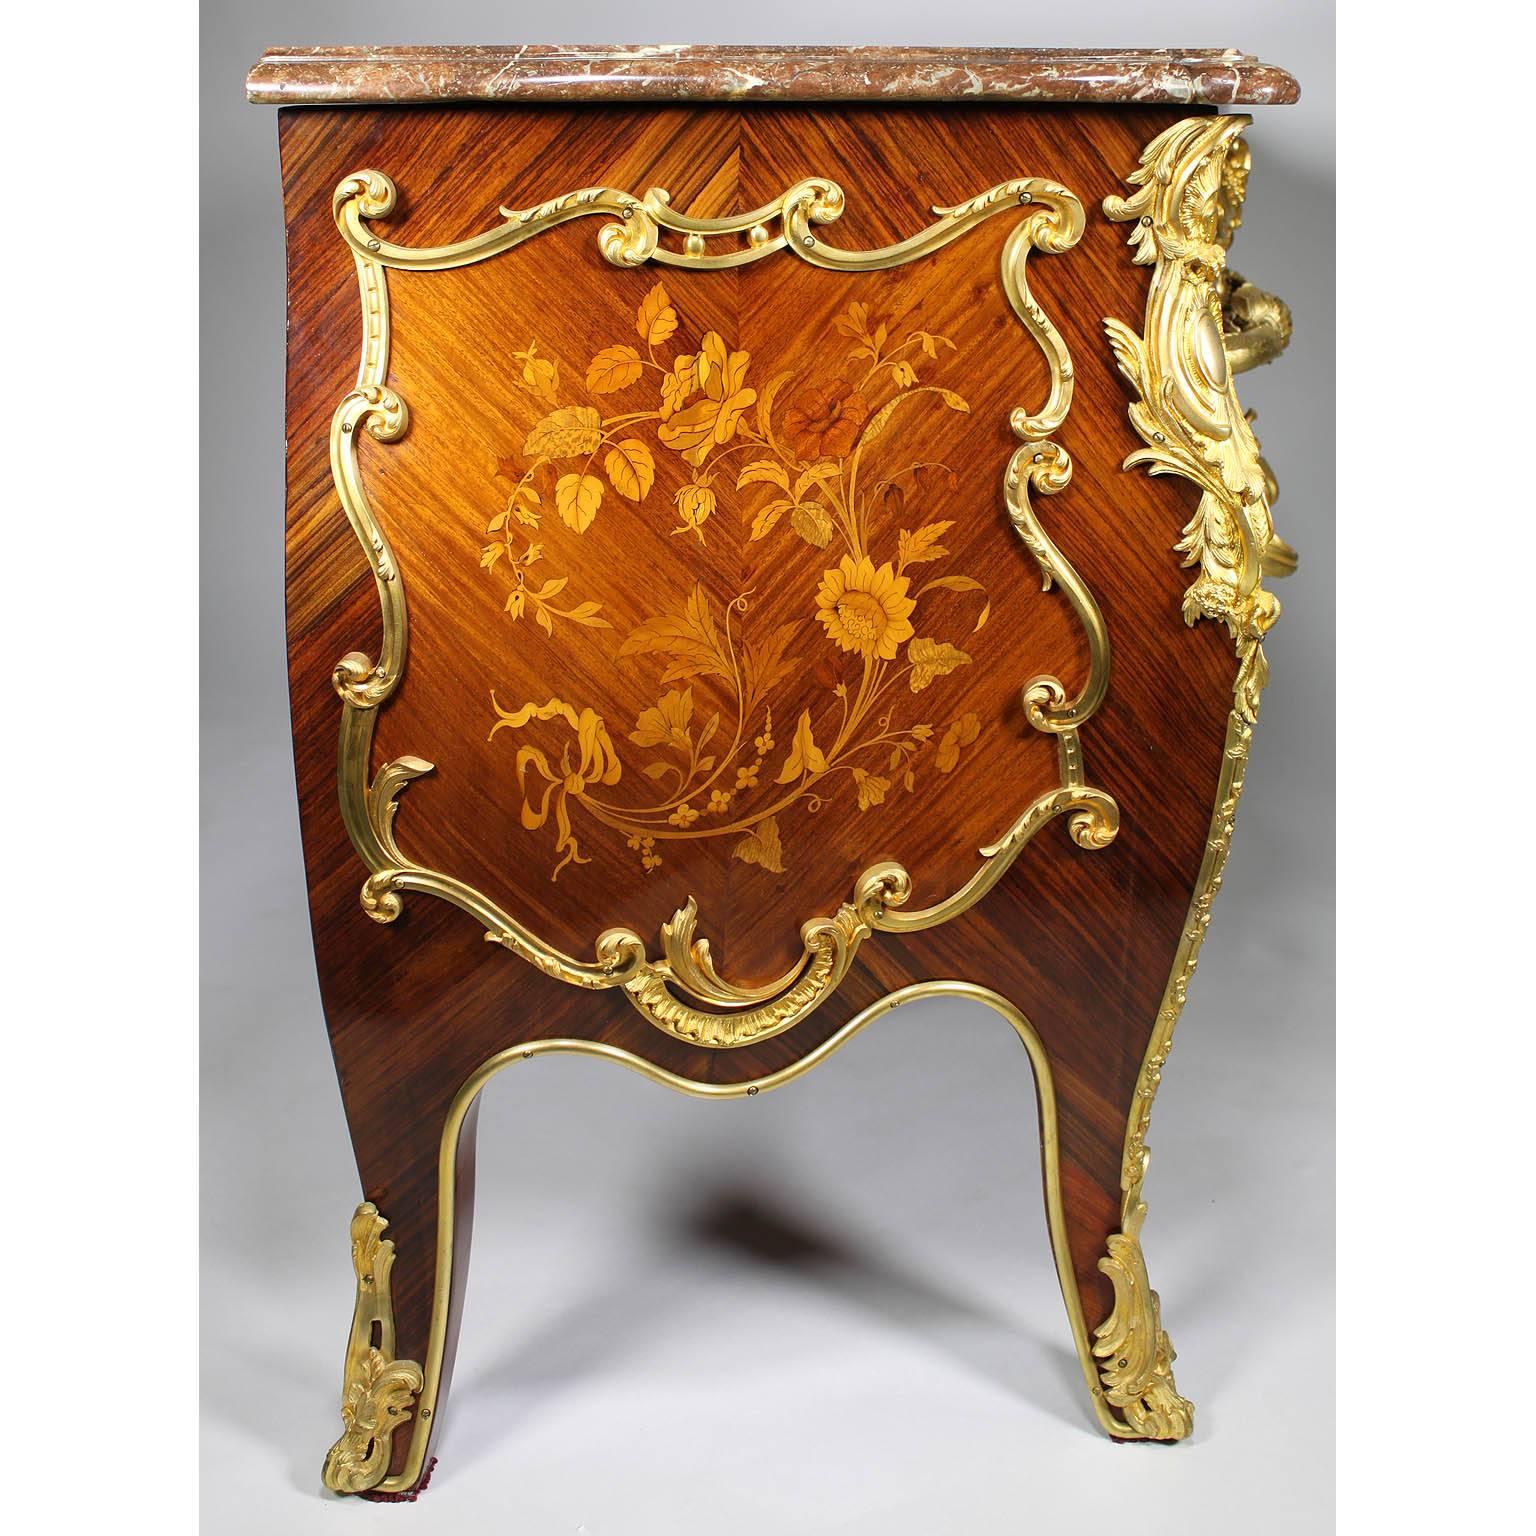 French, 19th Century, Louis XV Style Gilt Bronze-Mounted and Marquetry Commode For Sale 3